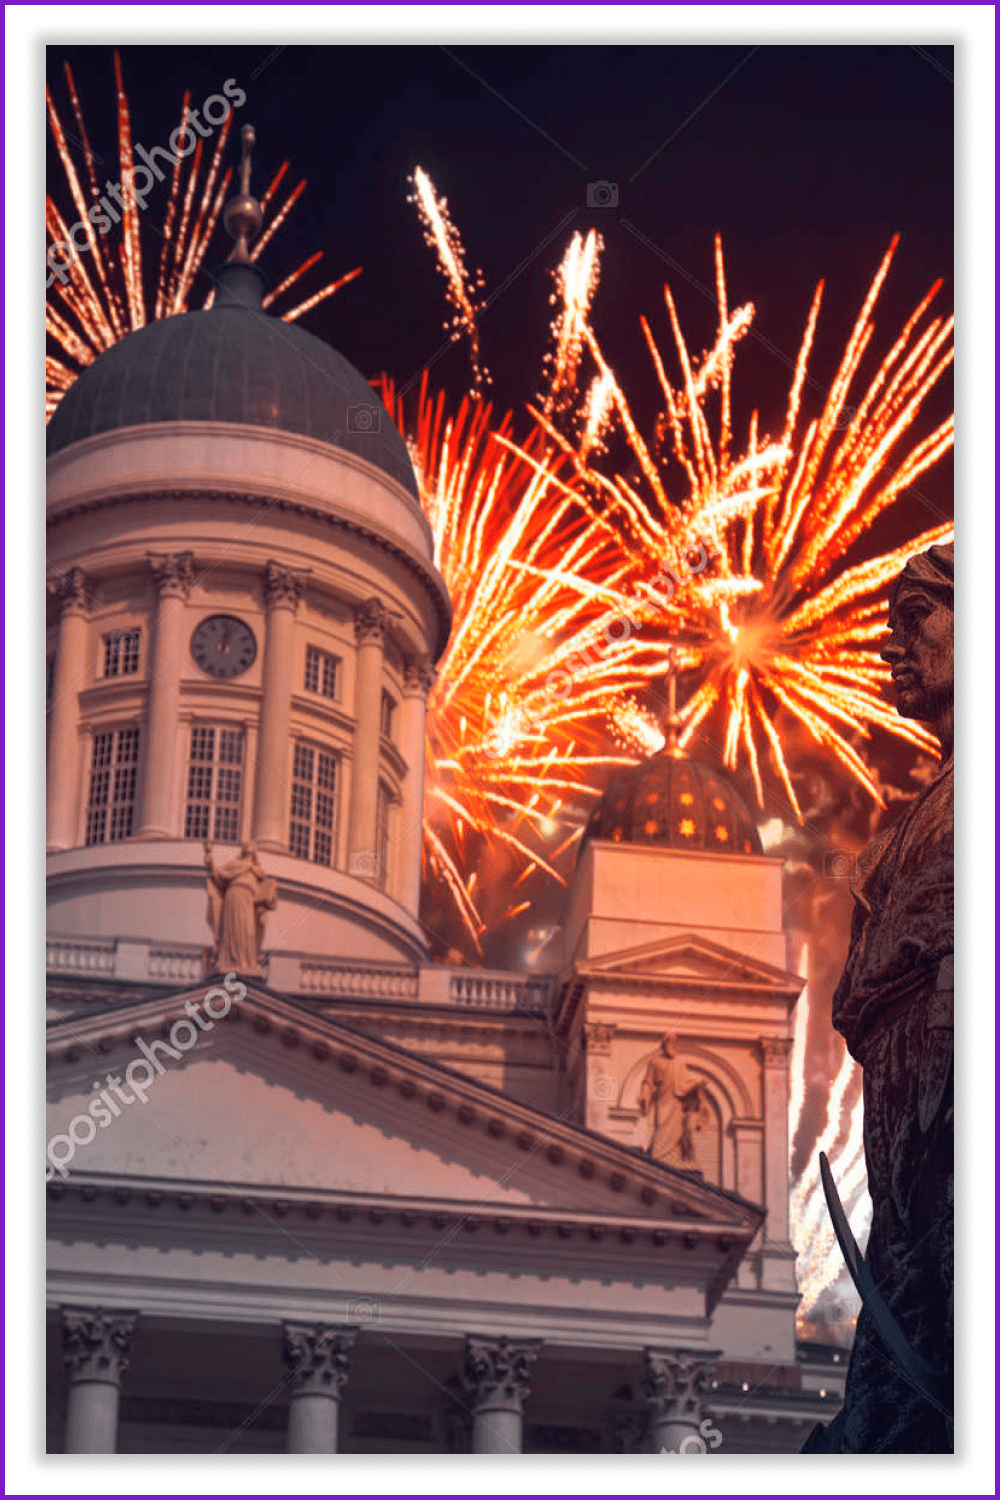 Photograph of the cathedral with fireworks behind it.